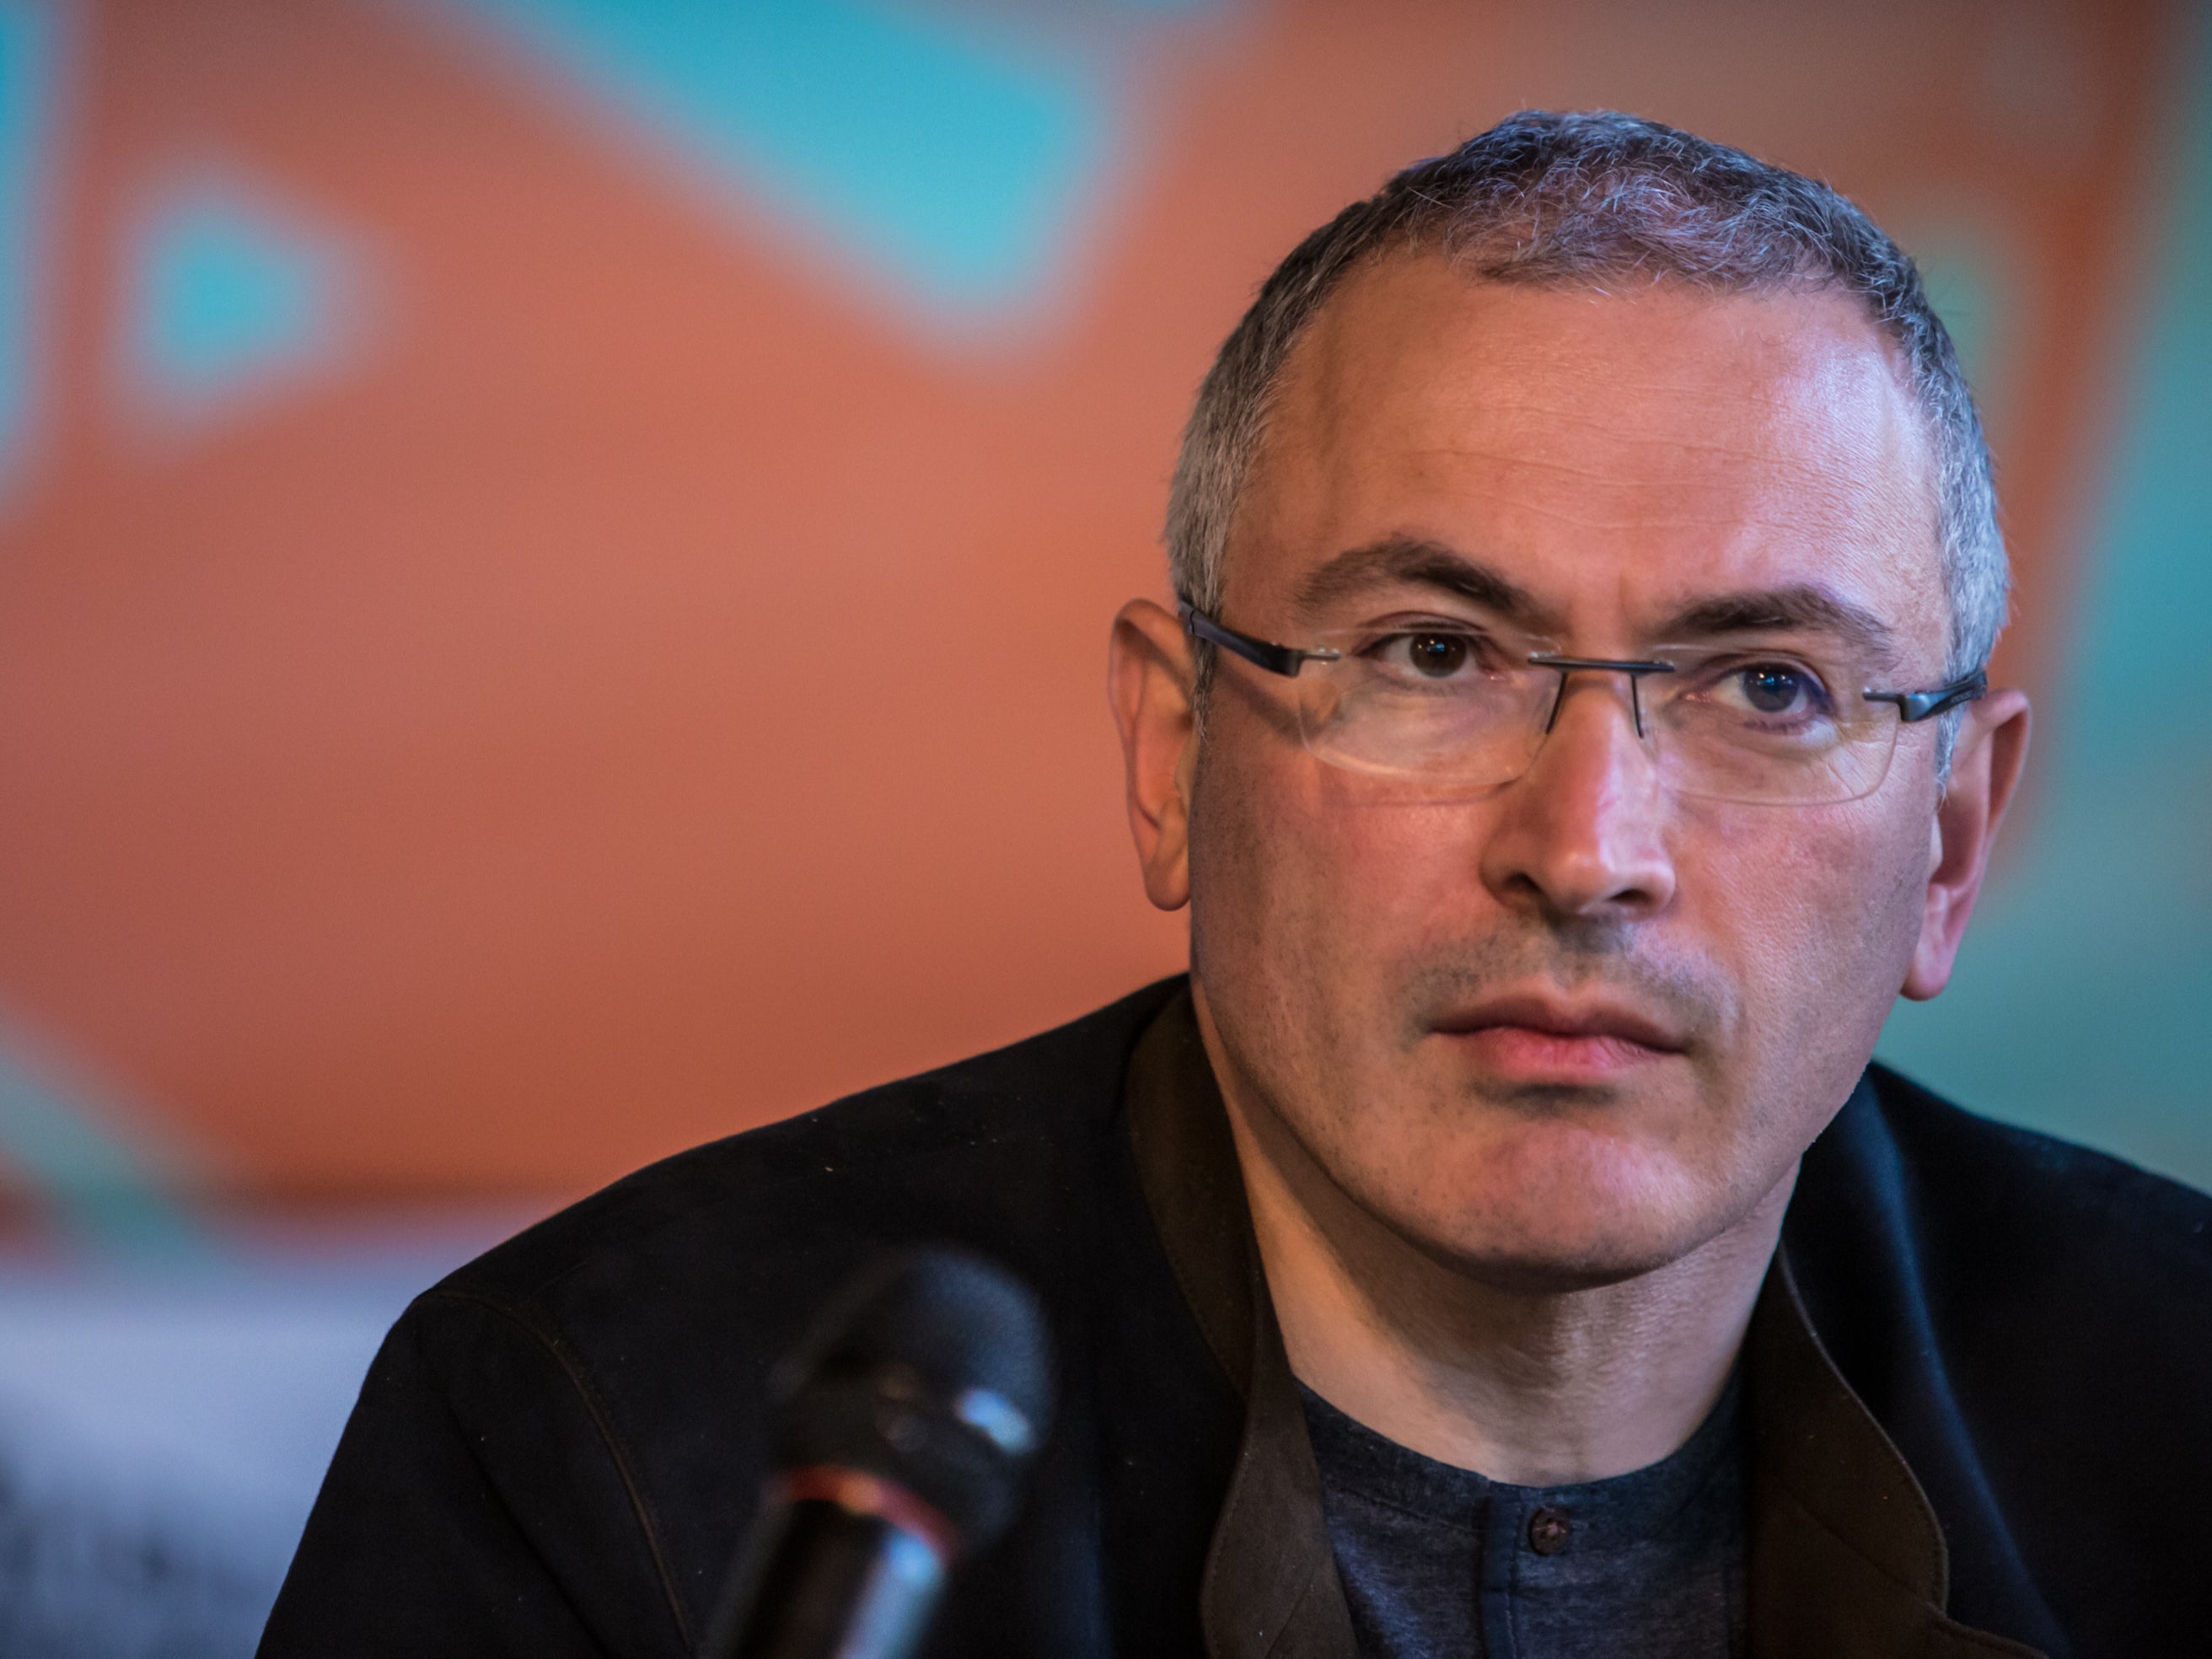 ‘The only way to help Ukraine is through weapons and the education of Ukrainian military,’ says Mikhail Khodorkovsky, the former owner of one of Russia’s largest oil companies